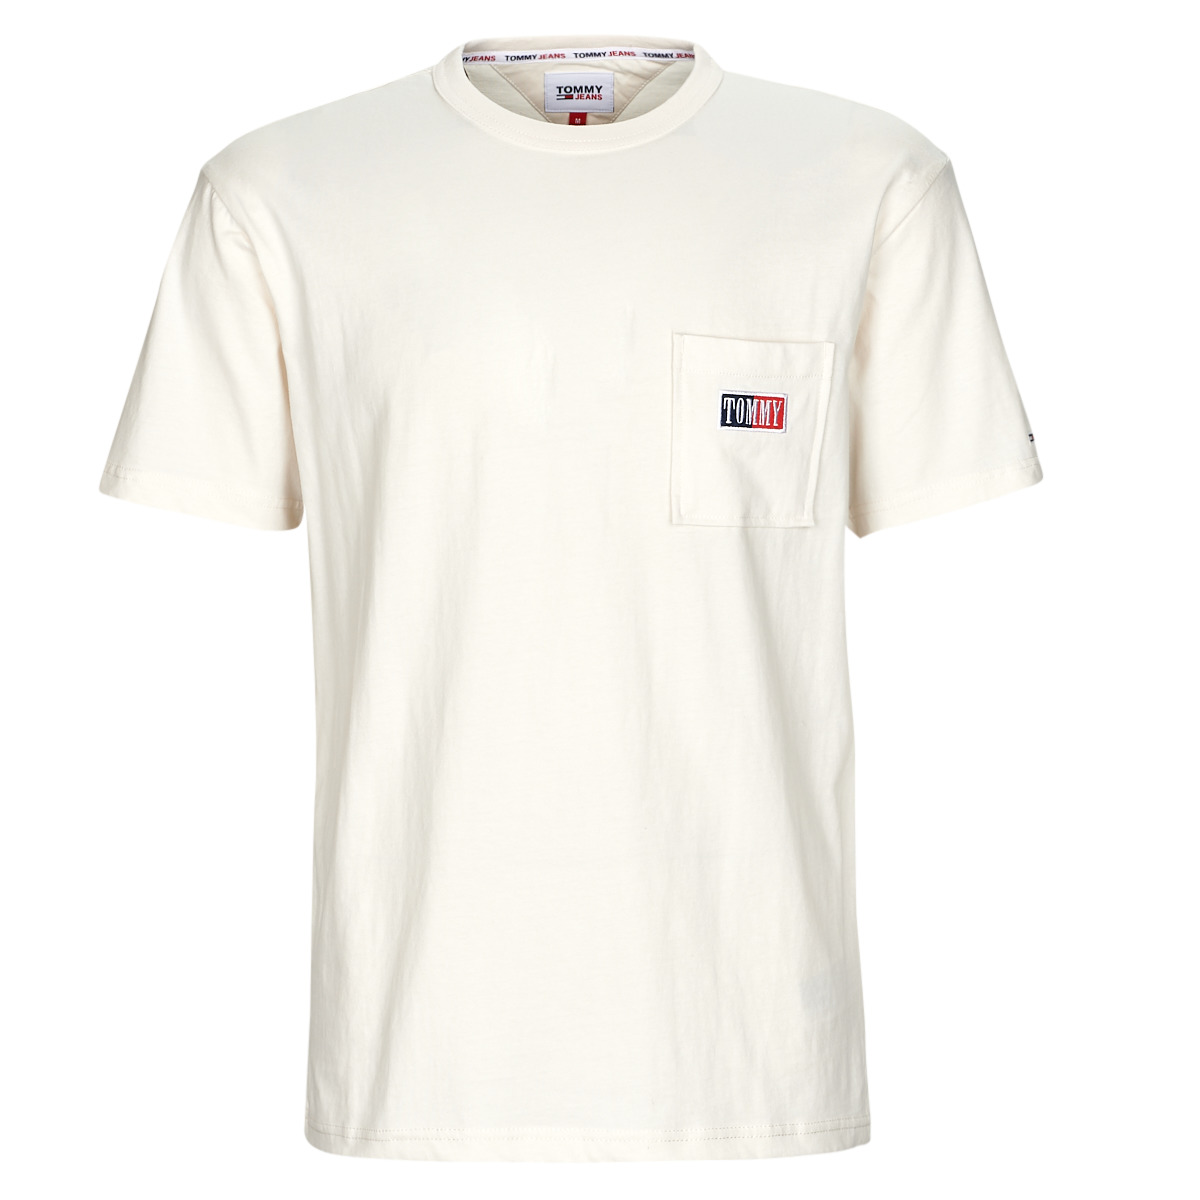 Tommy Jeans TJM CLSC delivery short-sleeved TEE White Clothing Spartoo NET TIMELESS - - TOMMY ! Free Men | t-shirts